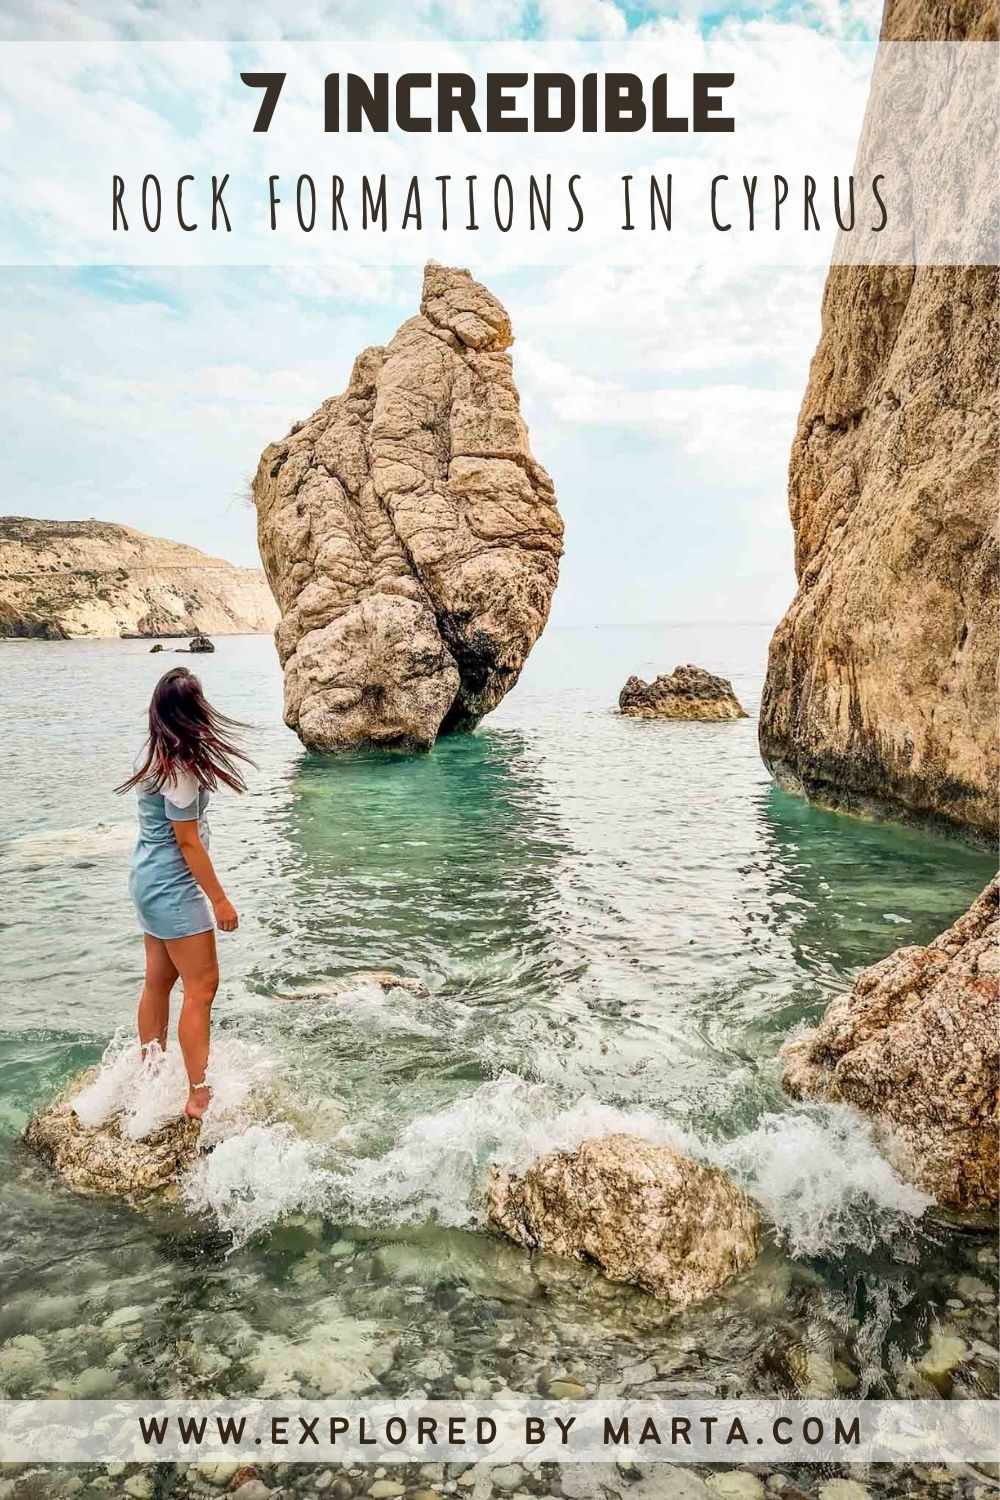 7 incredible rock formations in Cyprus